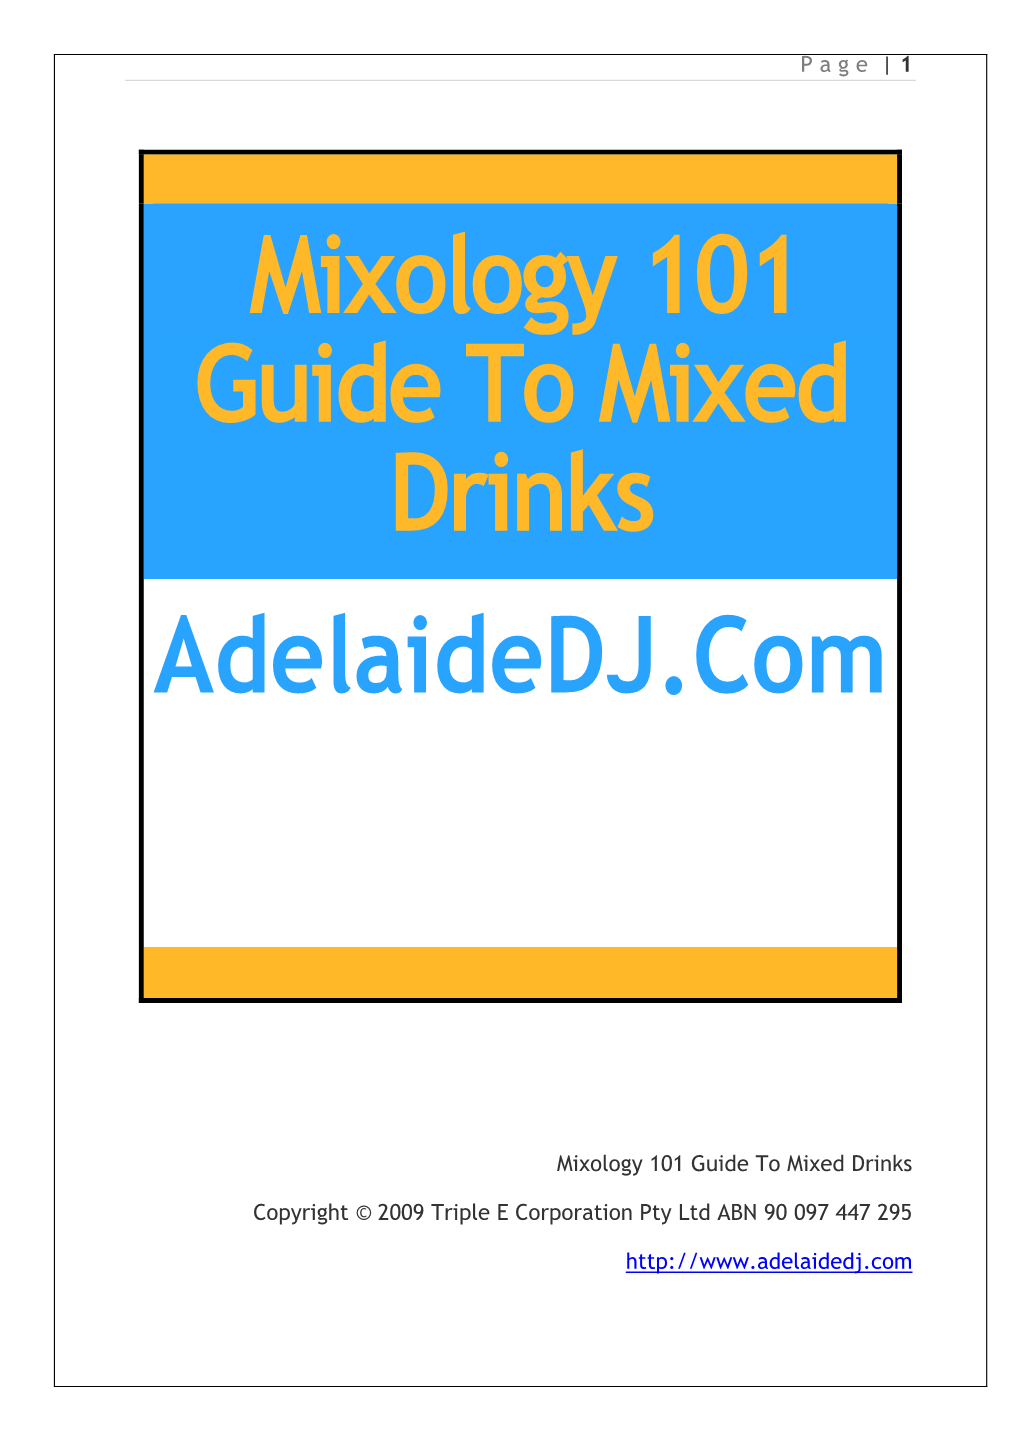 Mixology 101 Guide to Mixed Drinks Adelaidedj.Com